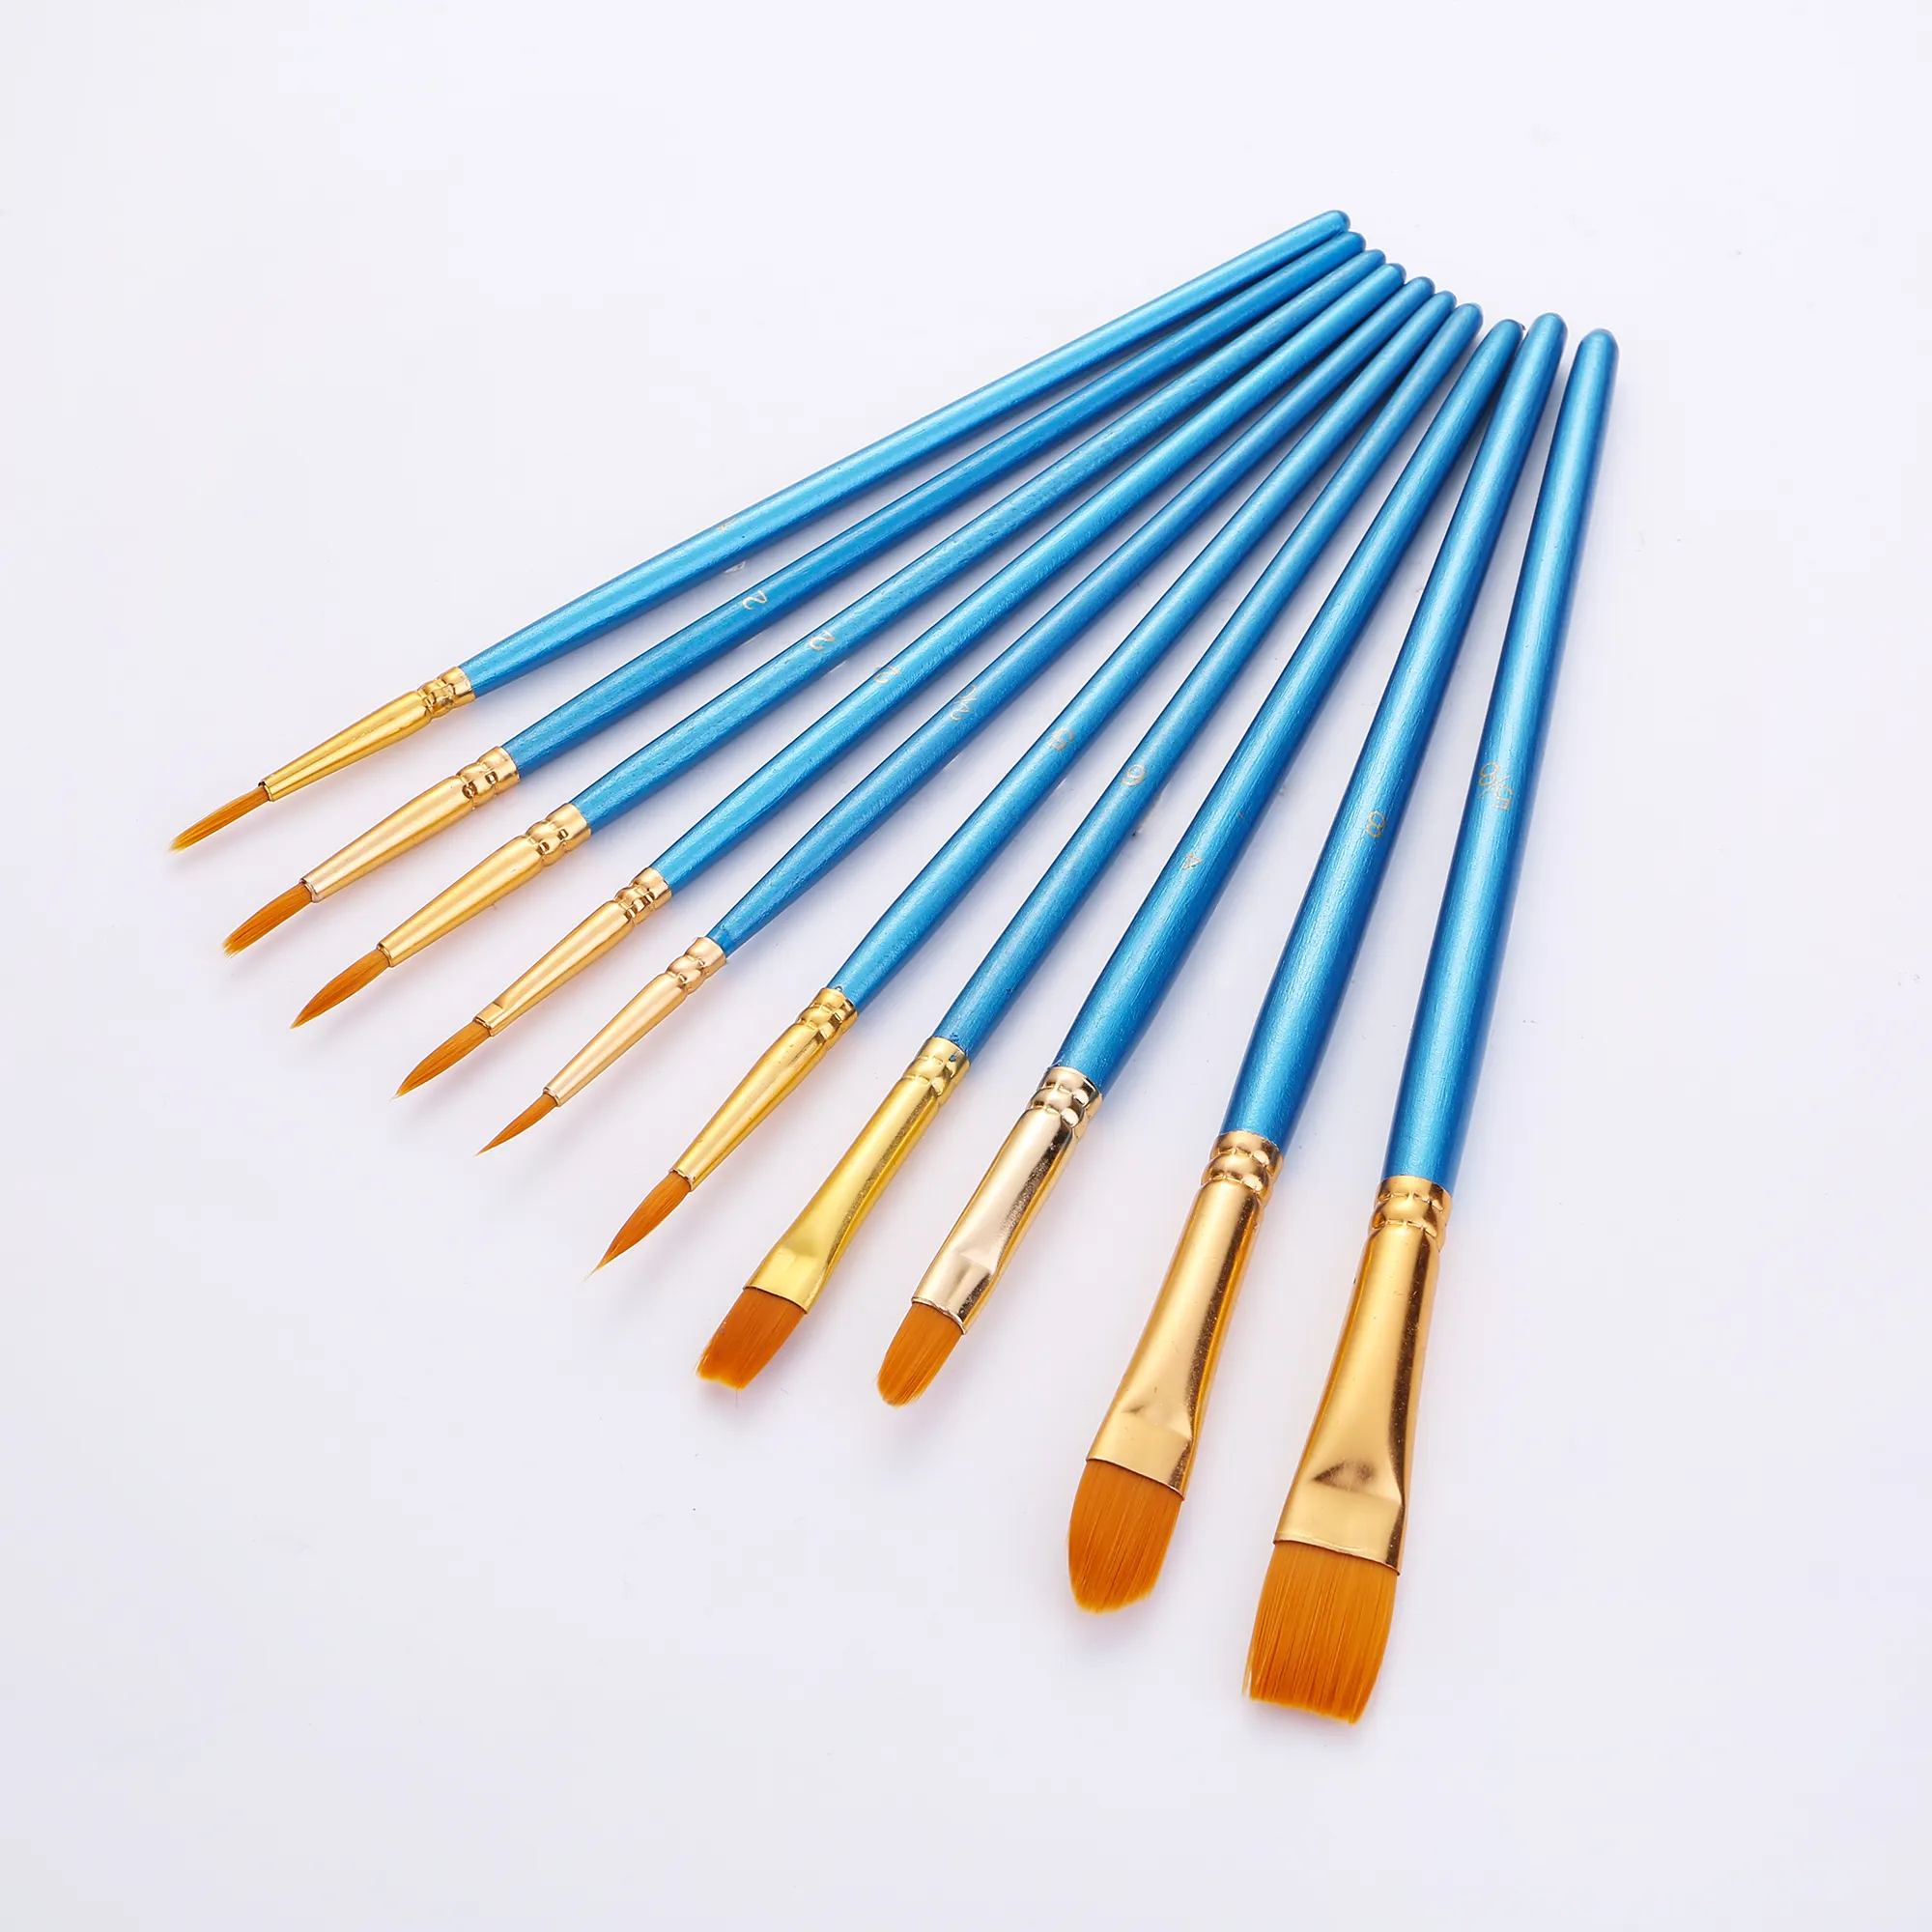 Blue plastic handle 10 artist's brushes for watercolor acrylic oil painting